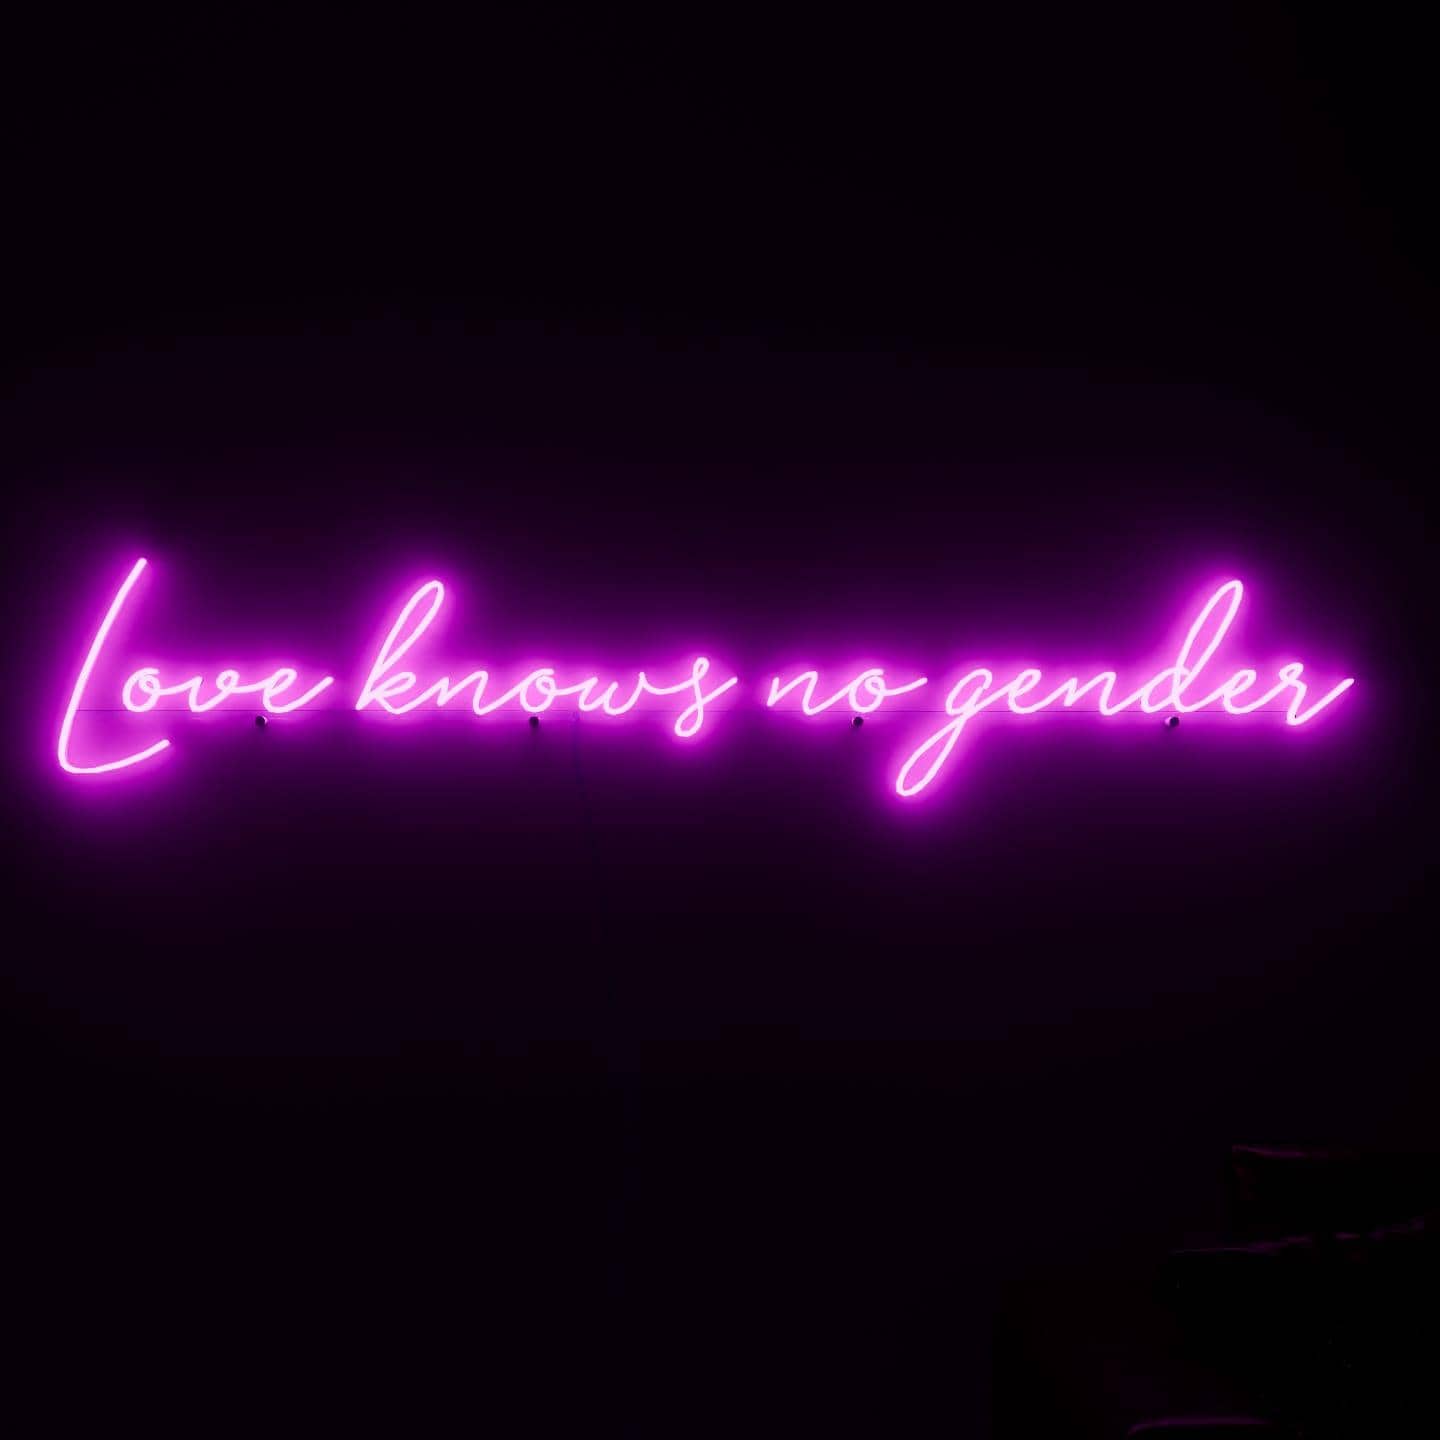 dark-night-shot-with-pink-neon-lights-hanging-on-the-wall-for-display-love-knows-no-gender